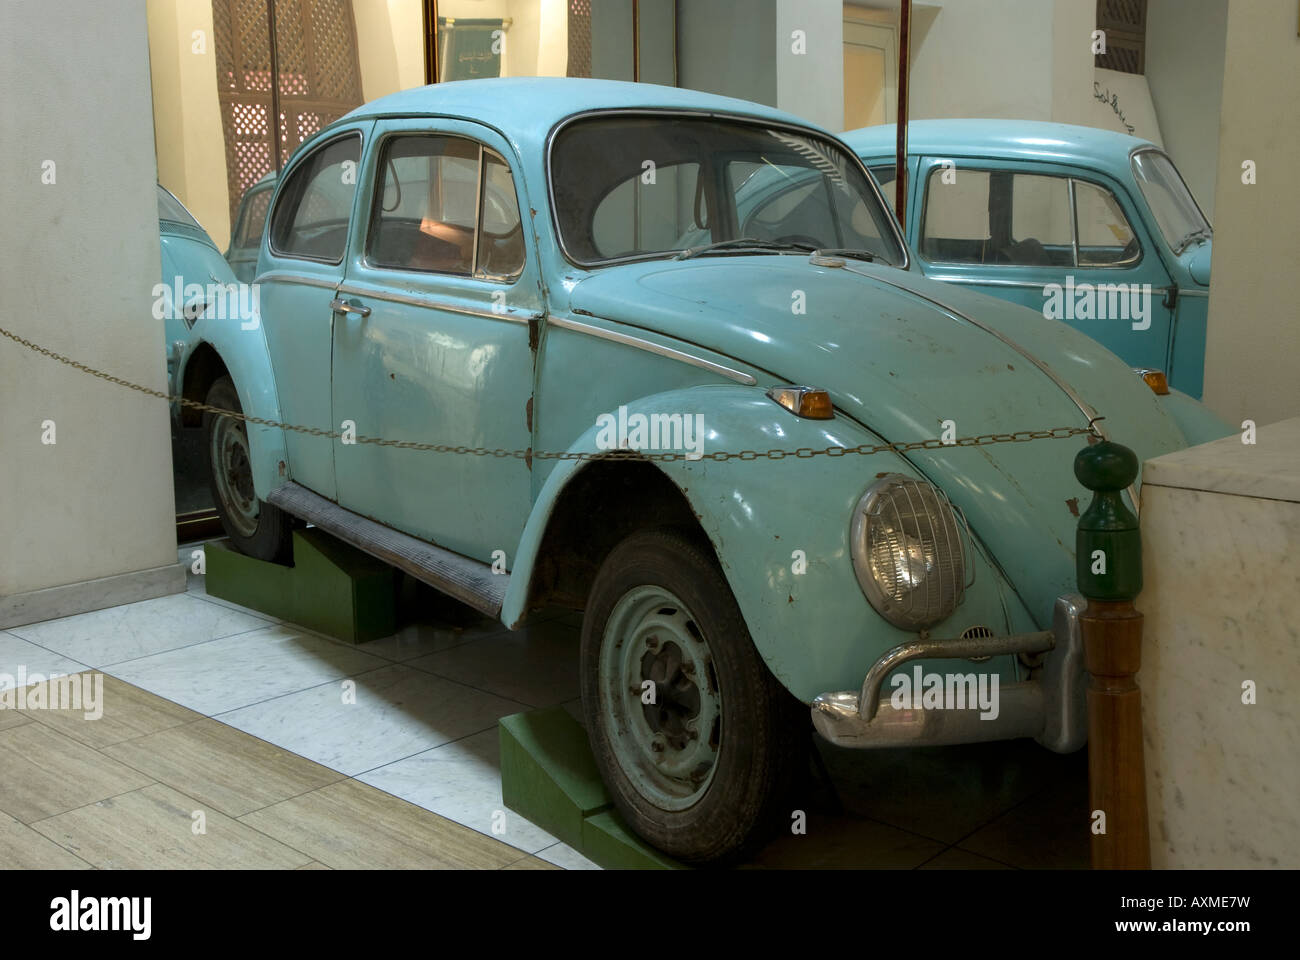 The VW Beetle car used by Colonel Muammar Al Qaddafi at the time of the 1969 Revolution, Tripoli, Libya. Stock Photo